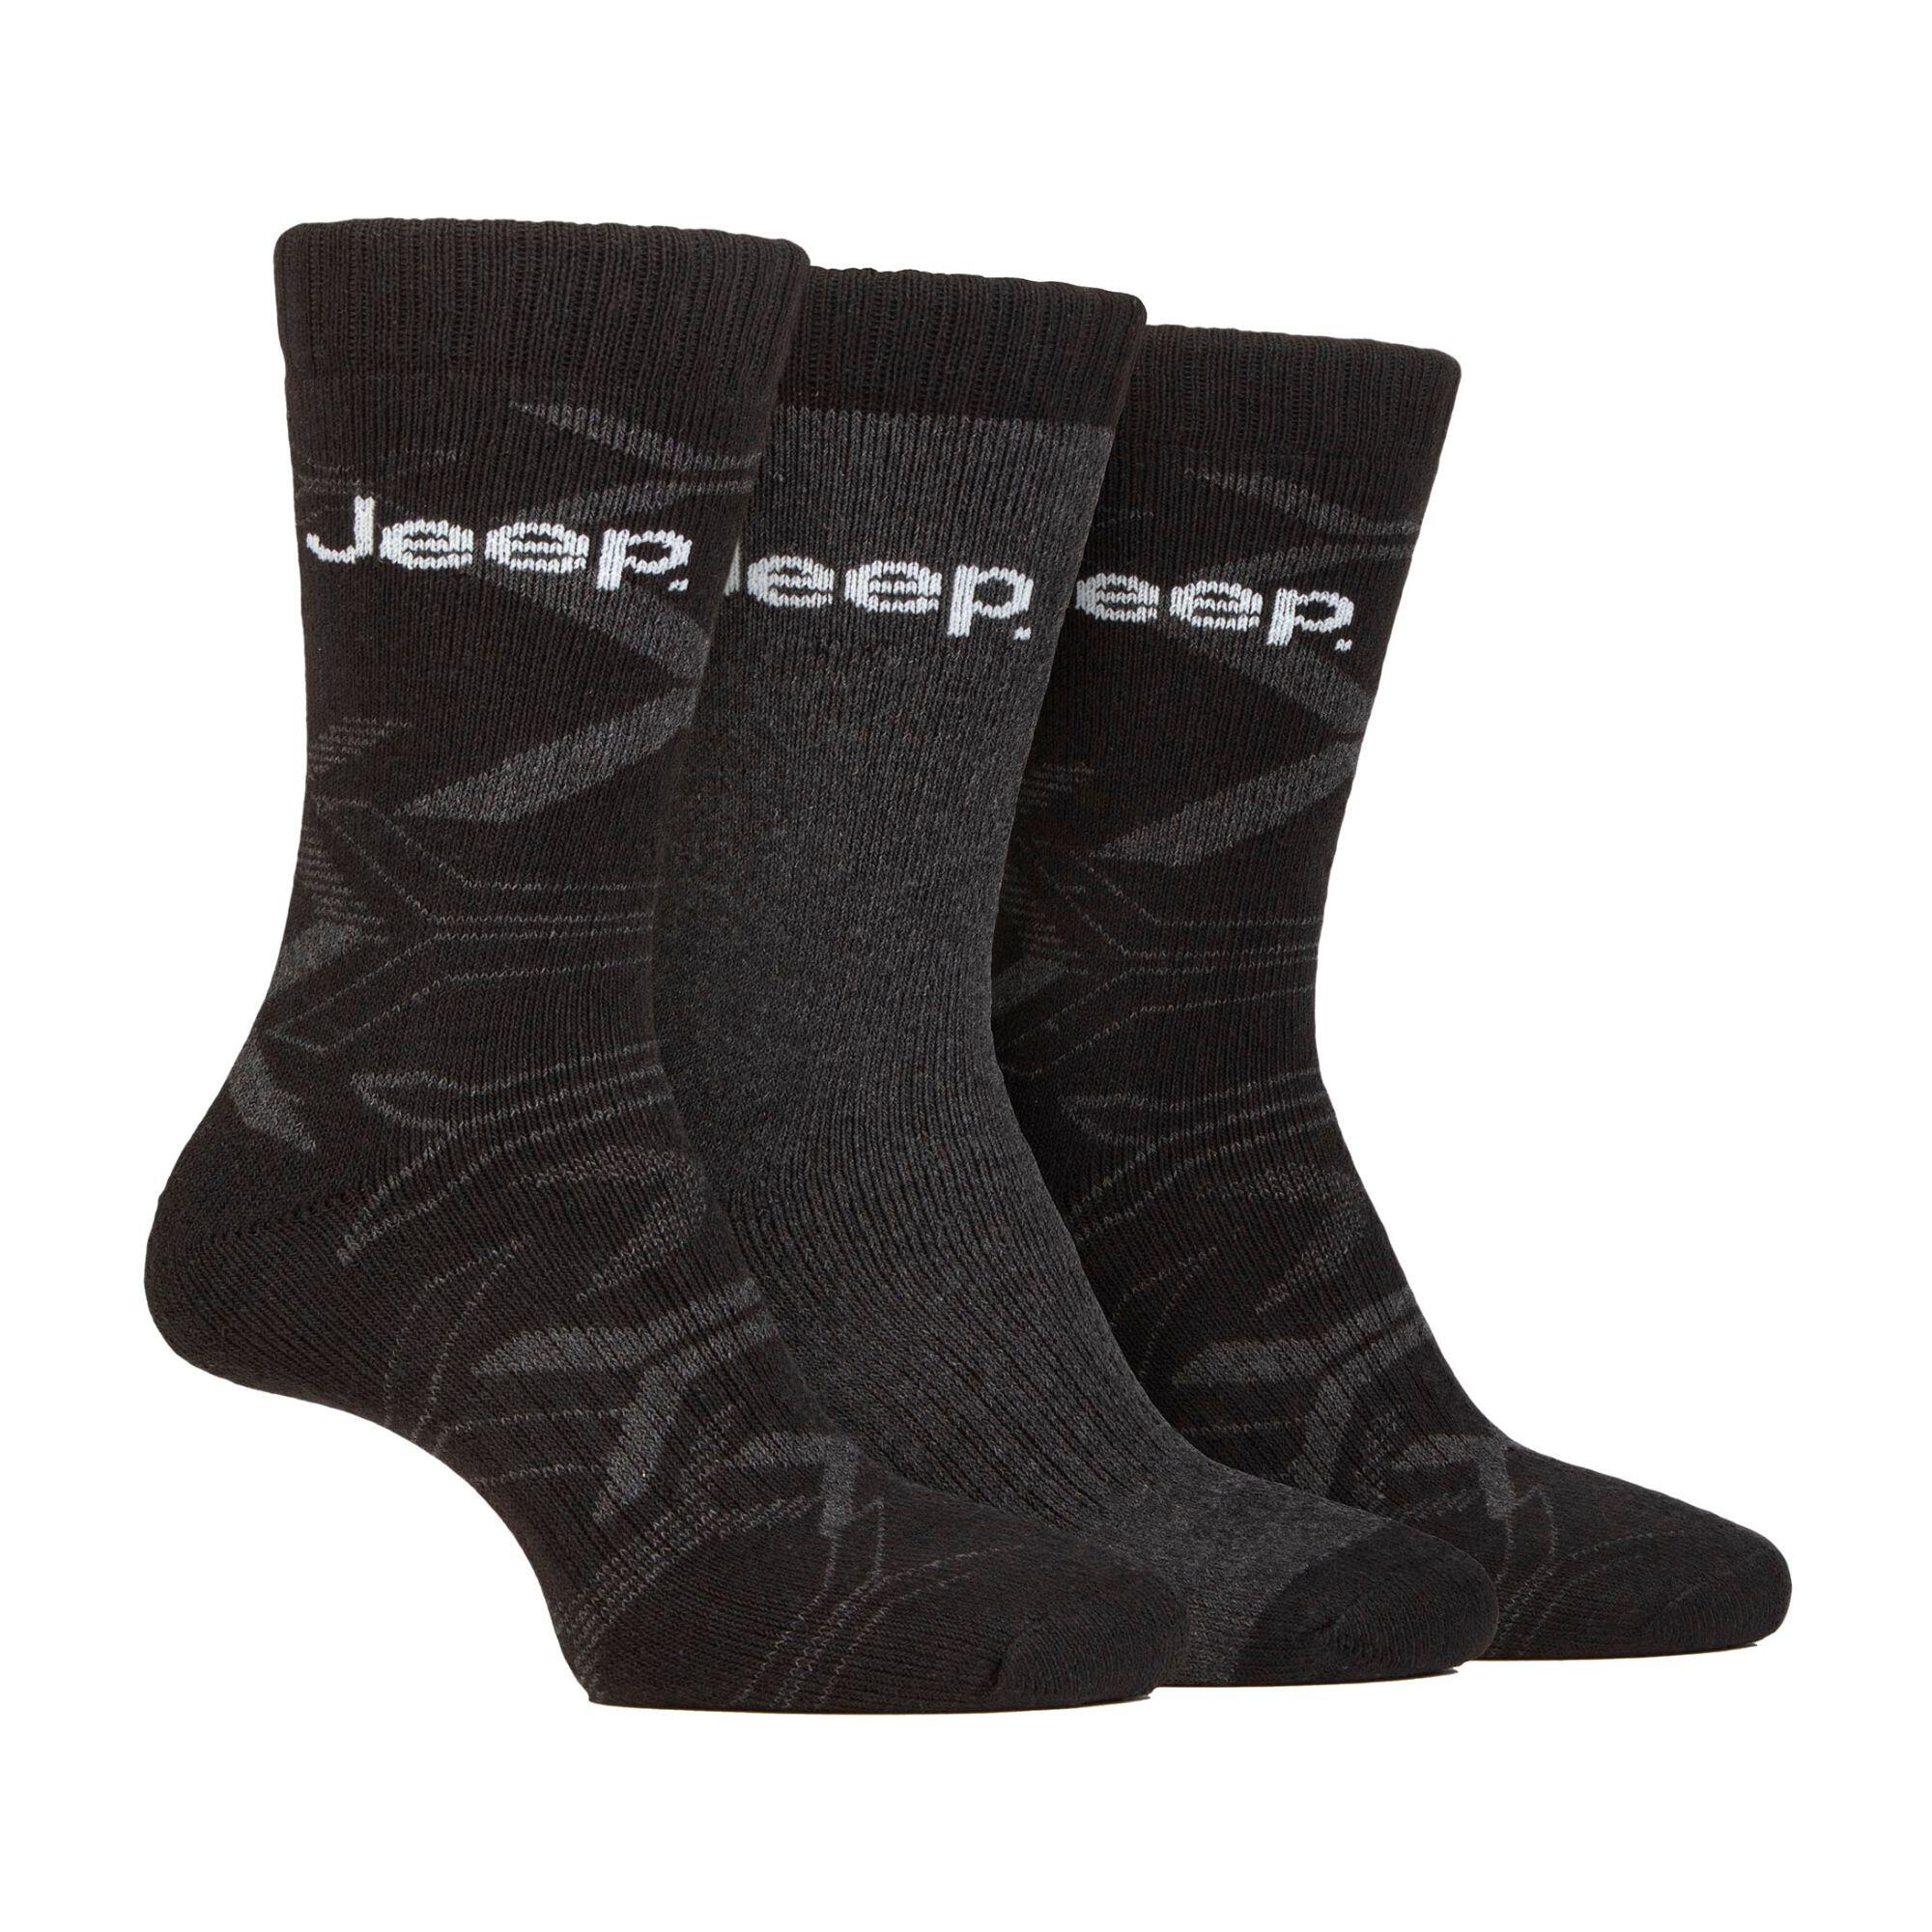 JEEP Mens Walking Boot Anti Blister Recycled Cotton Socks